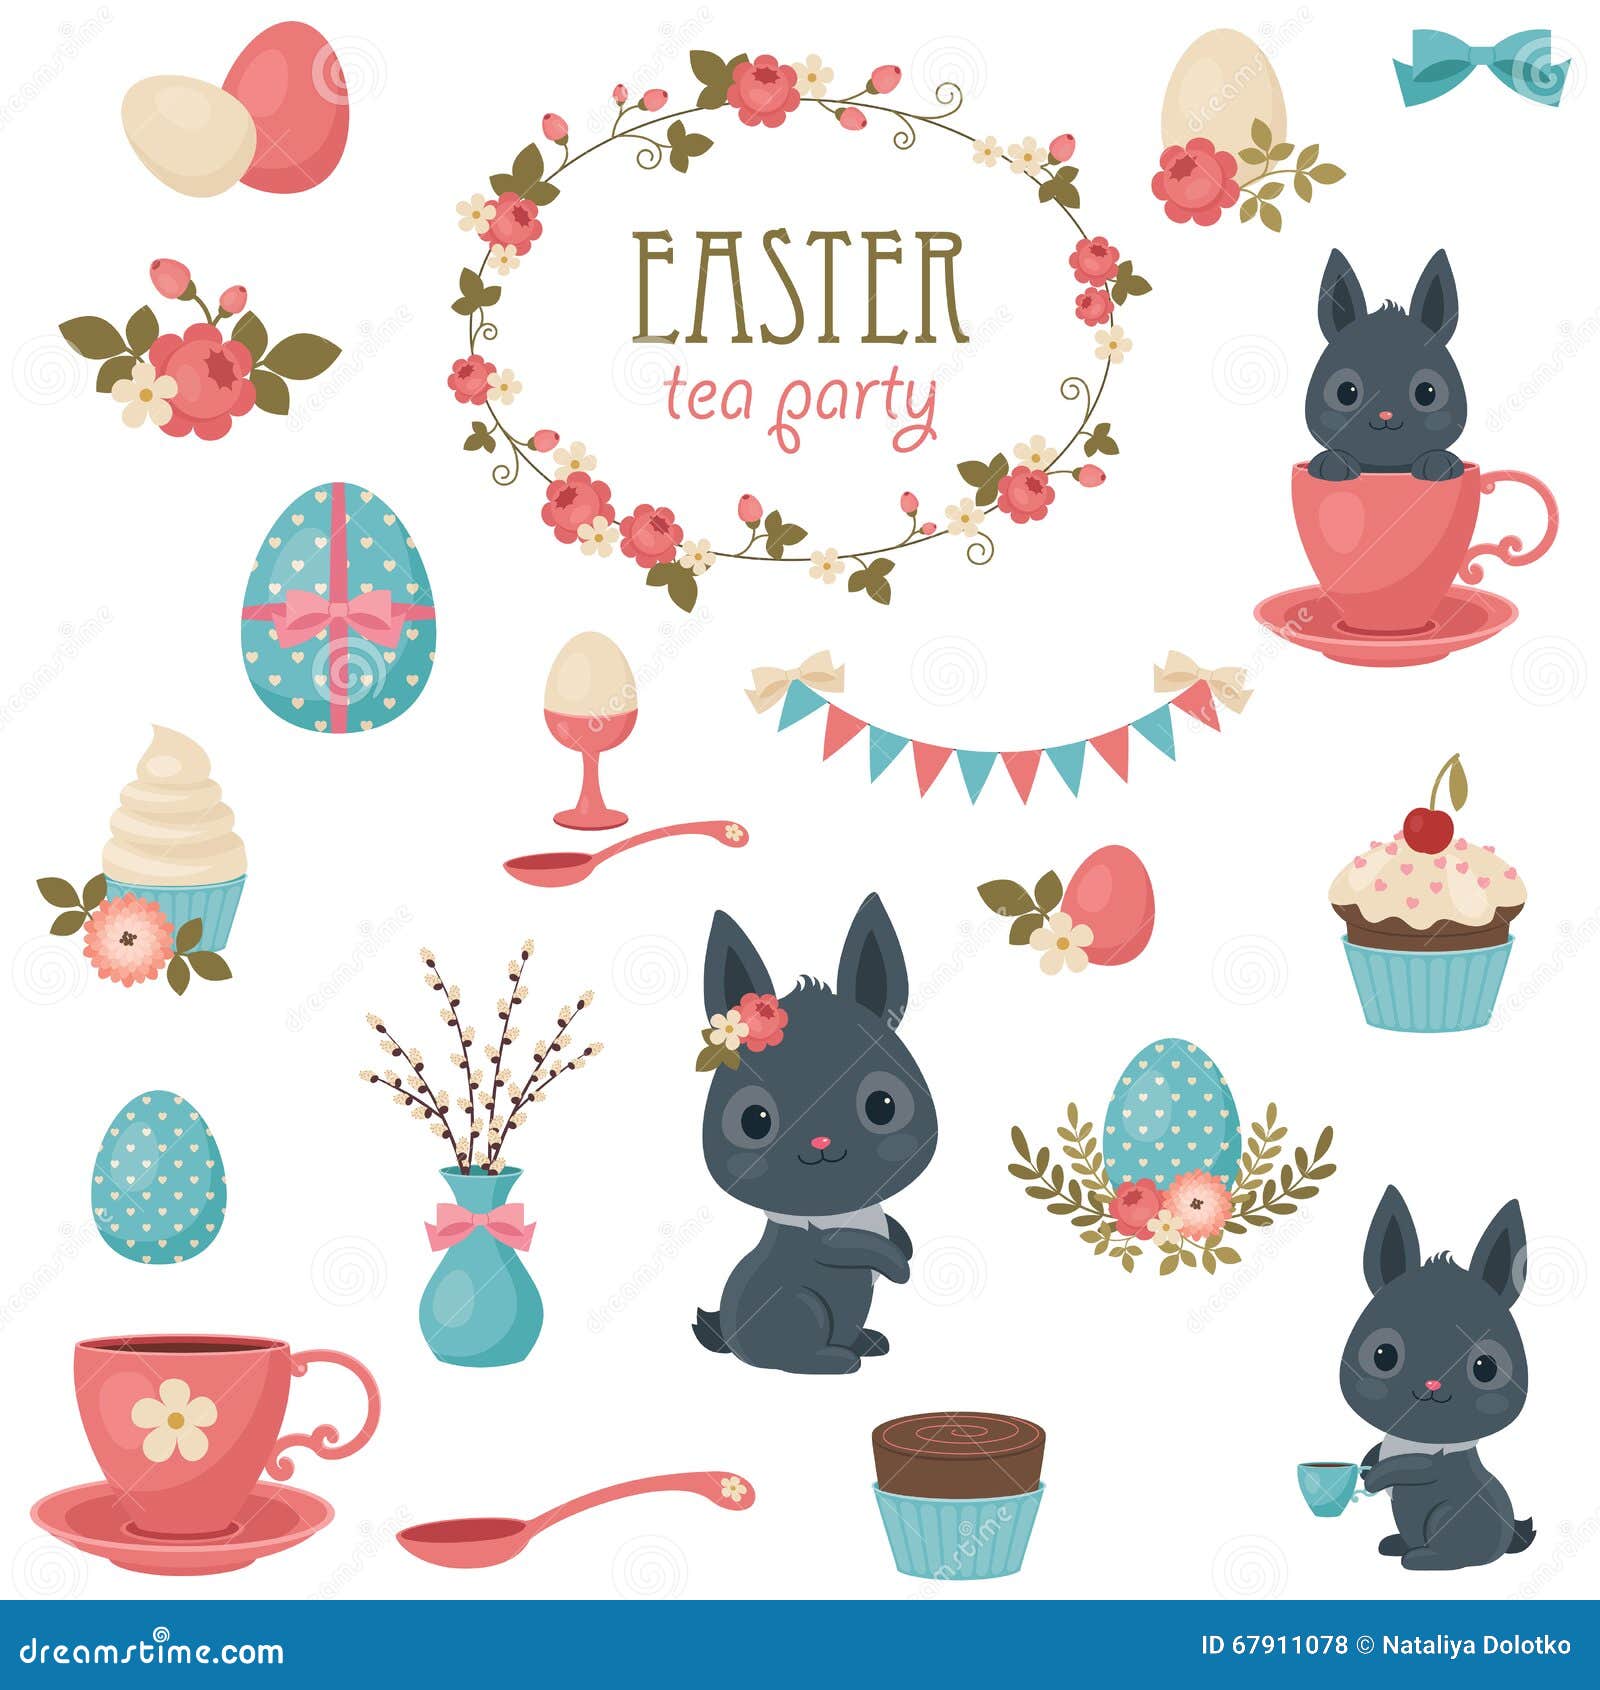 easter party clip art - photo #31